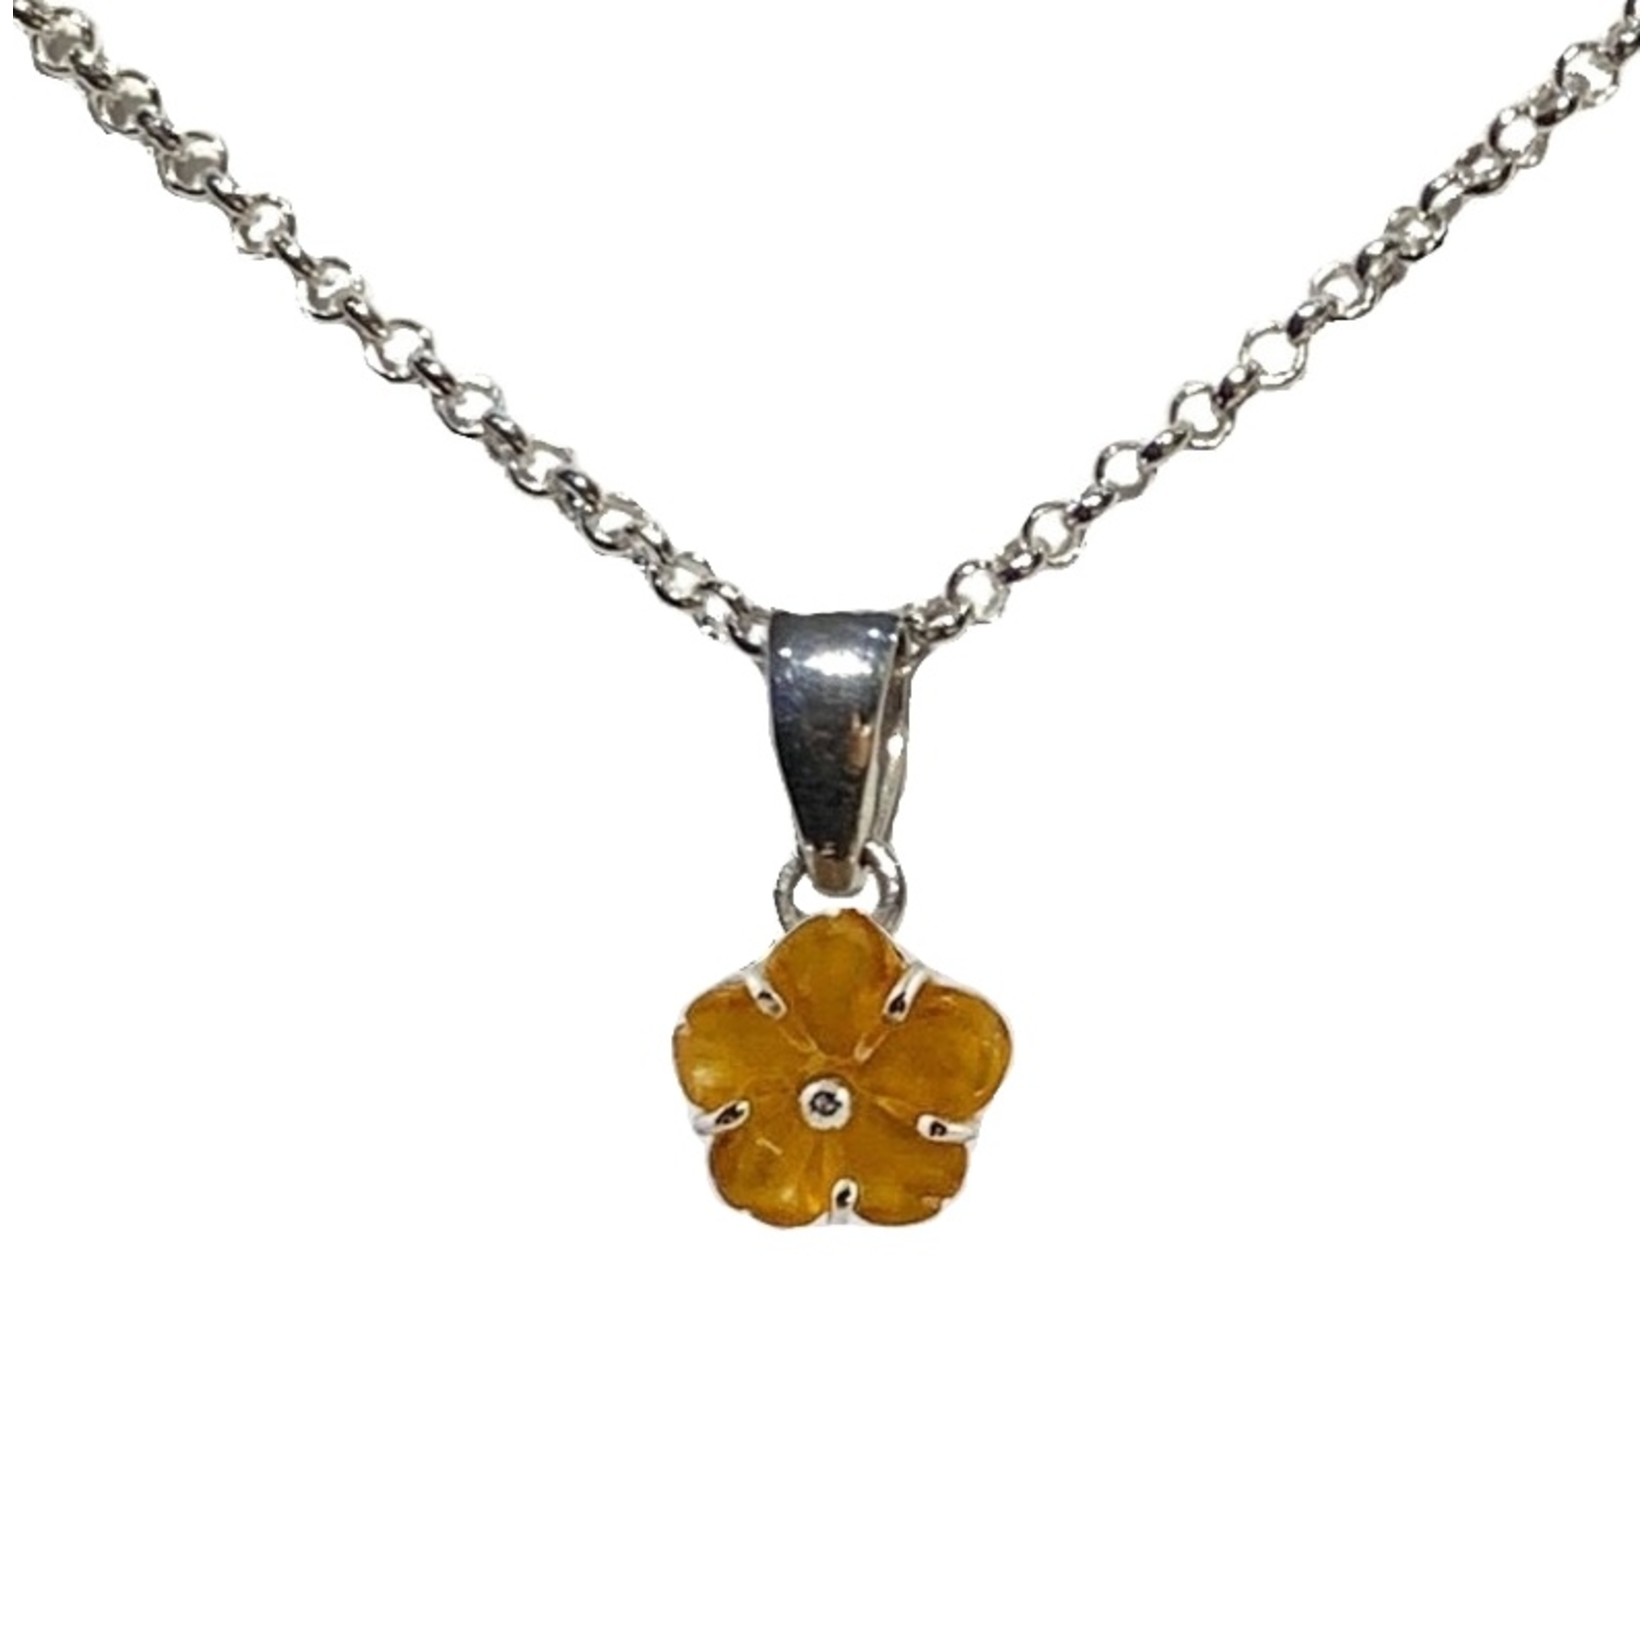 Necklace with citrine pendant